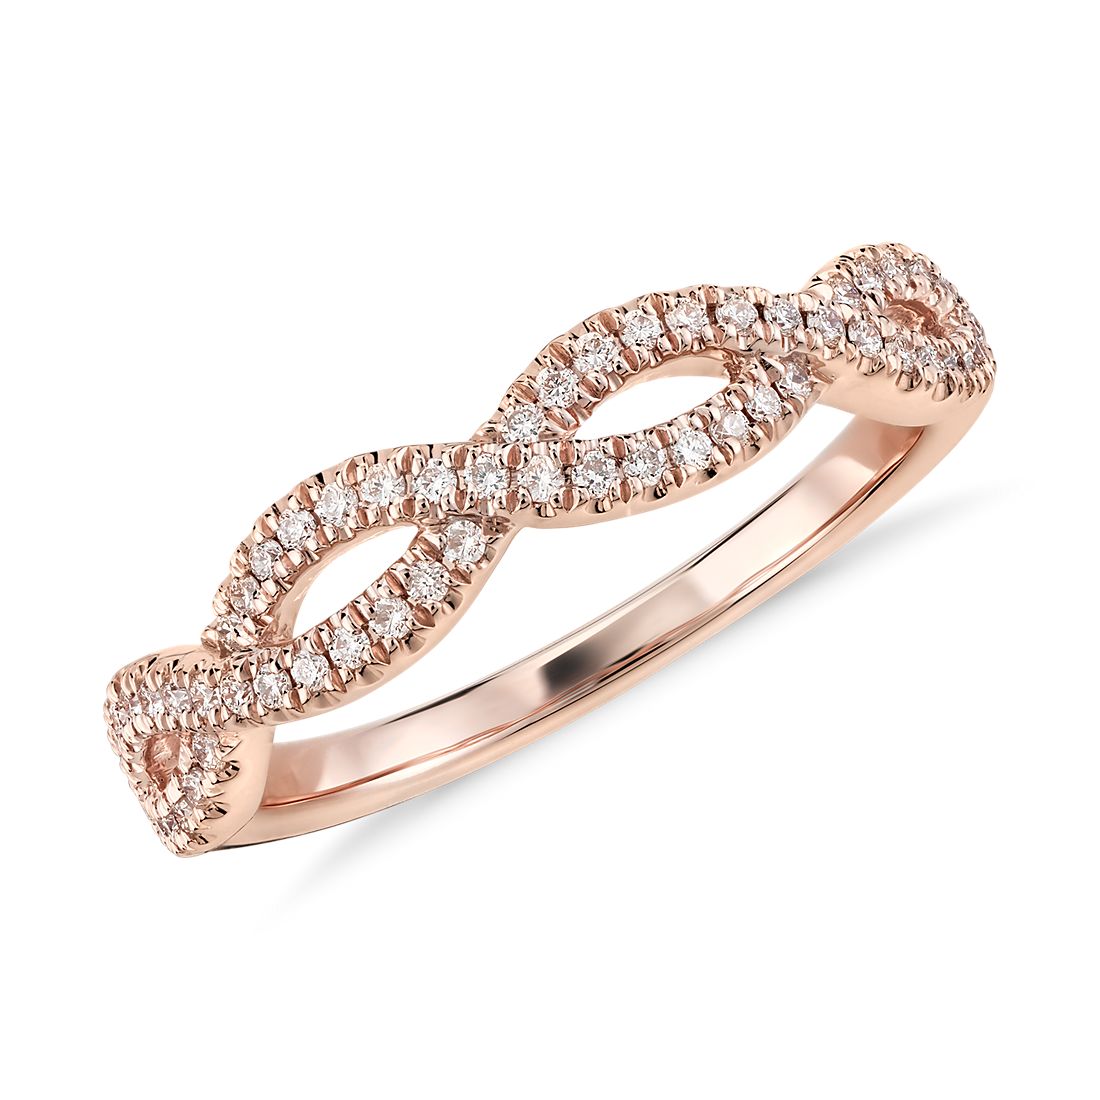 Image result for 14K ROSE GOLD PAVE INFINITY DIAMOND WEDDING RING